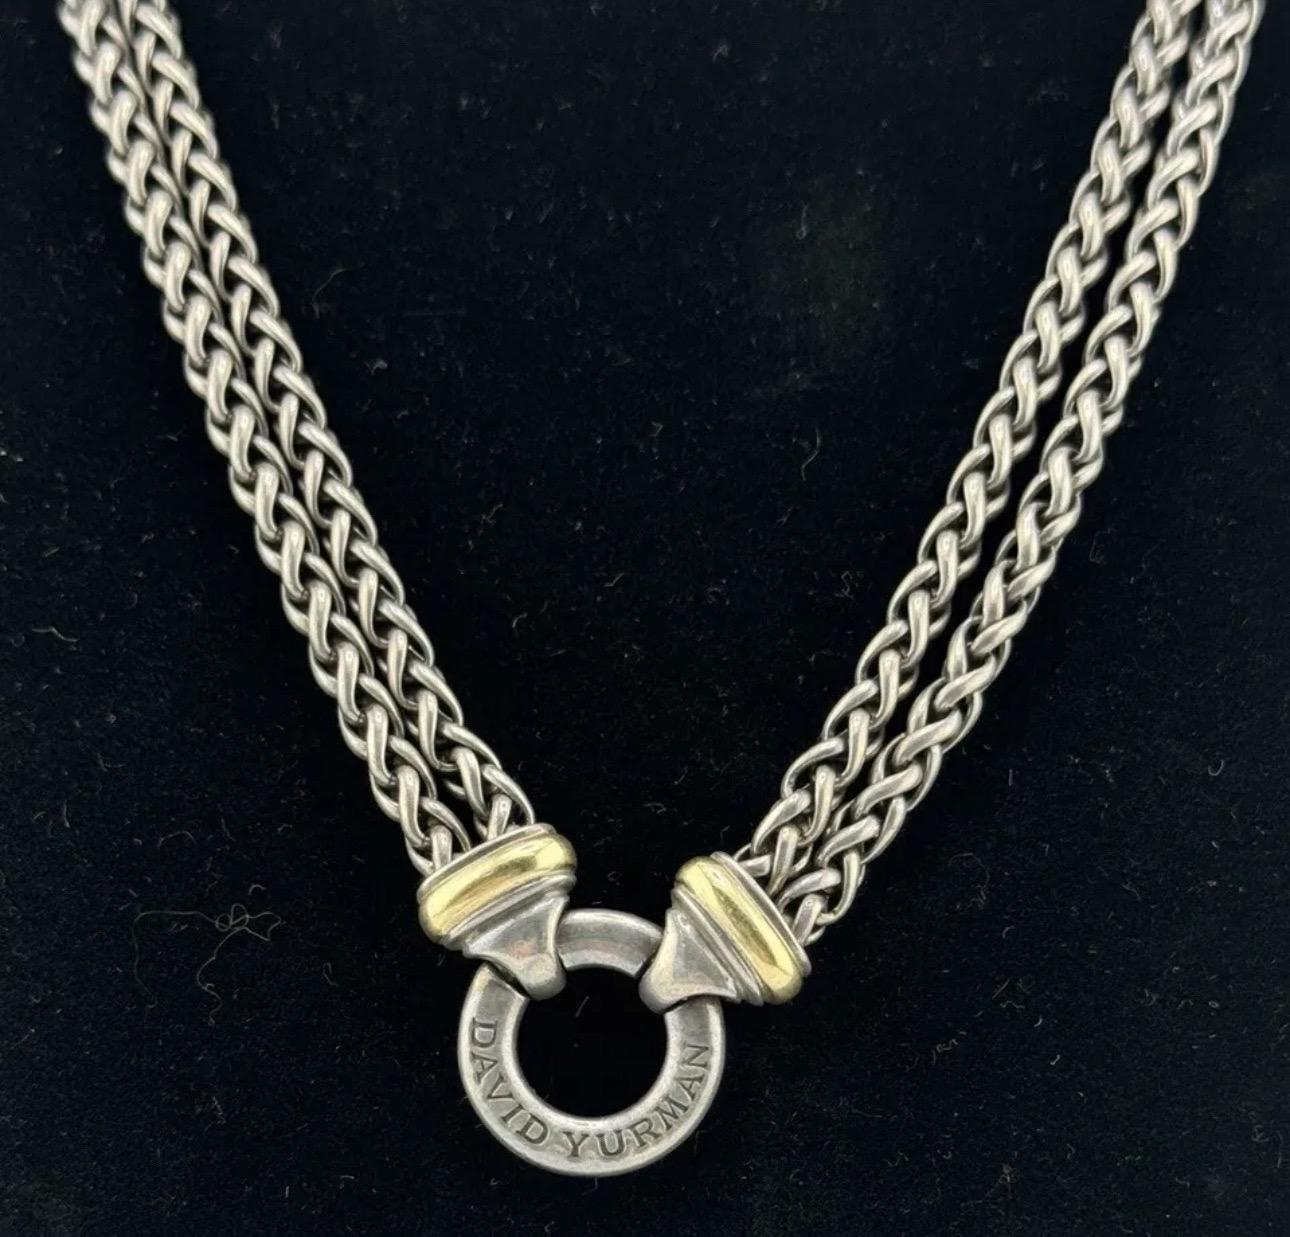 This David Yurman necklace features a double wheat chain design with alternating links in sterling silver . The chain is perfect for adding a touch of luxury to any outfit. The brand, David Yurman, is known for their high-quality jewelry and this